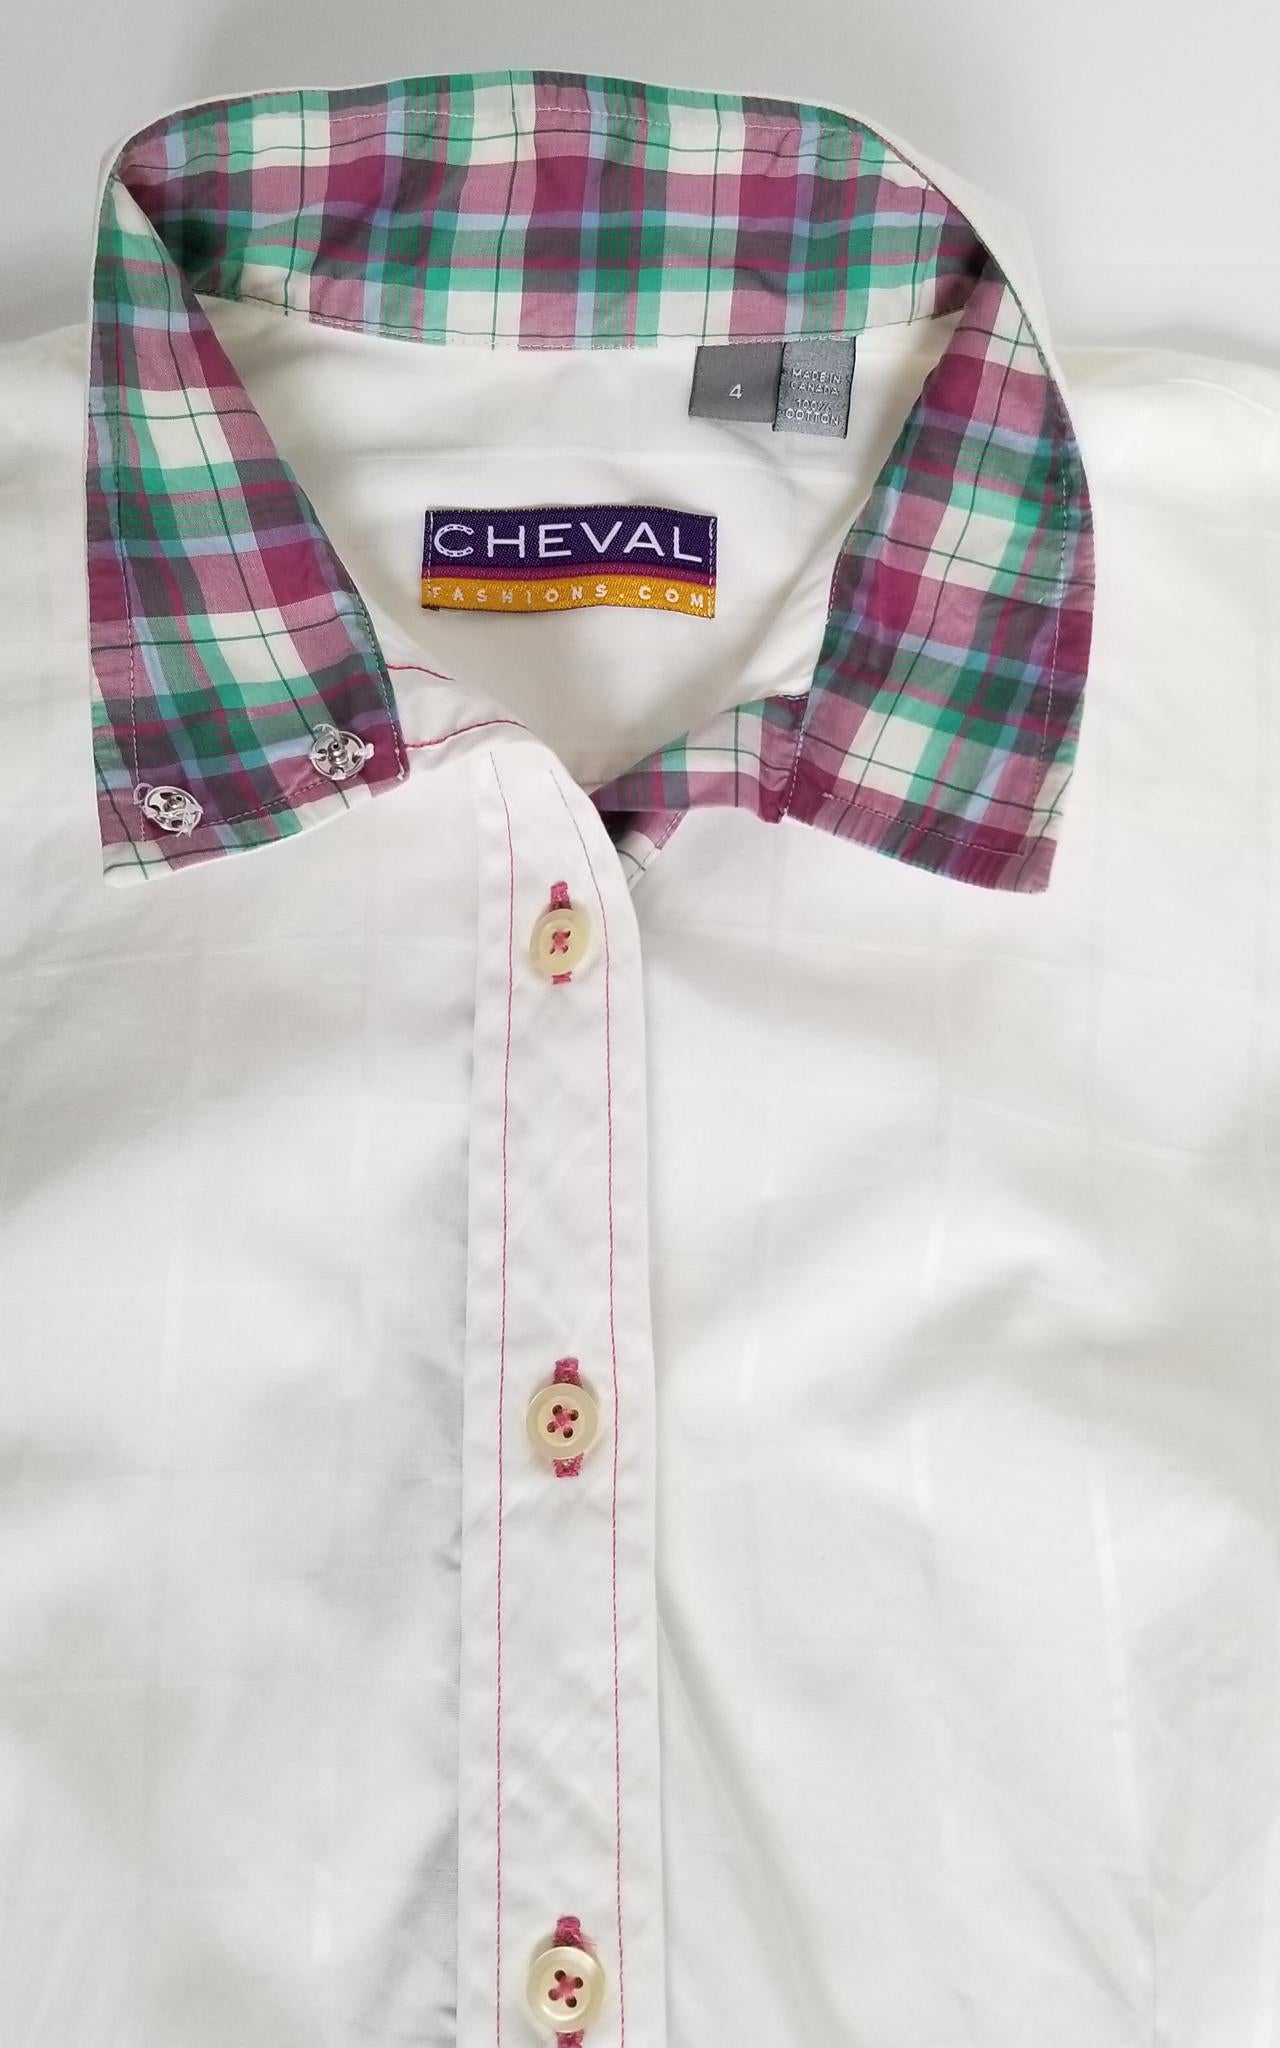 Cheval Fashions Competition Shirt - White (Pink Plaid Collar) - Women's 4